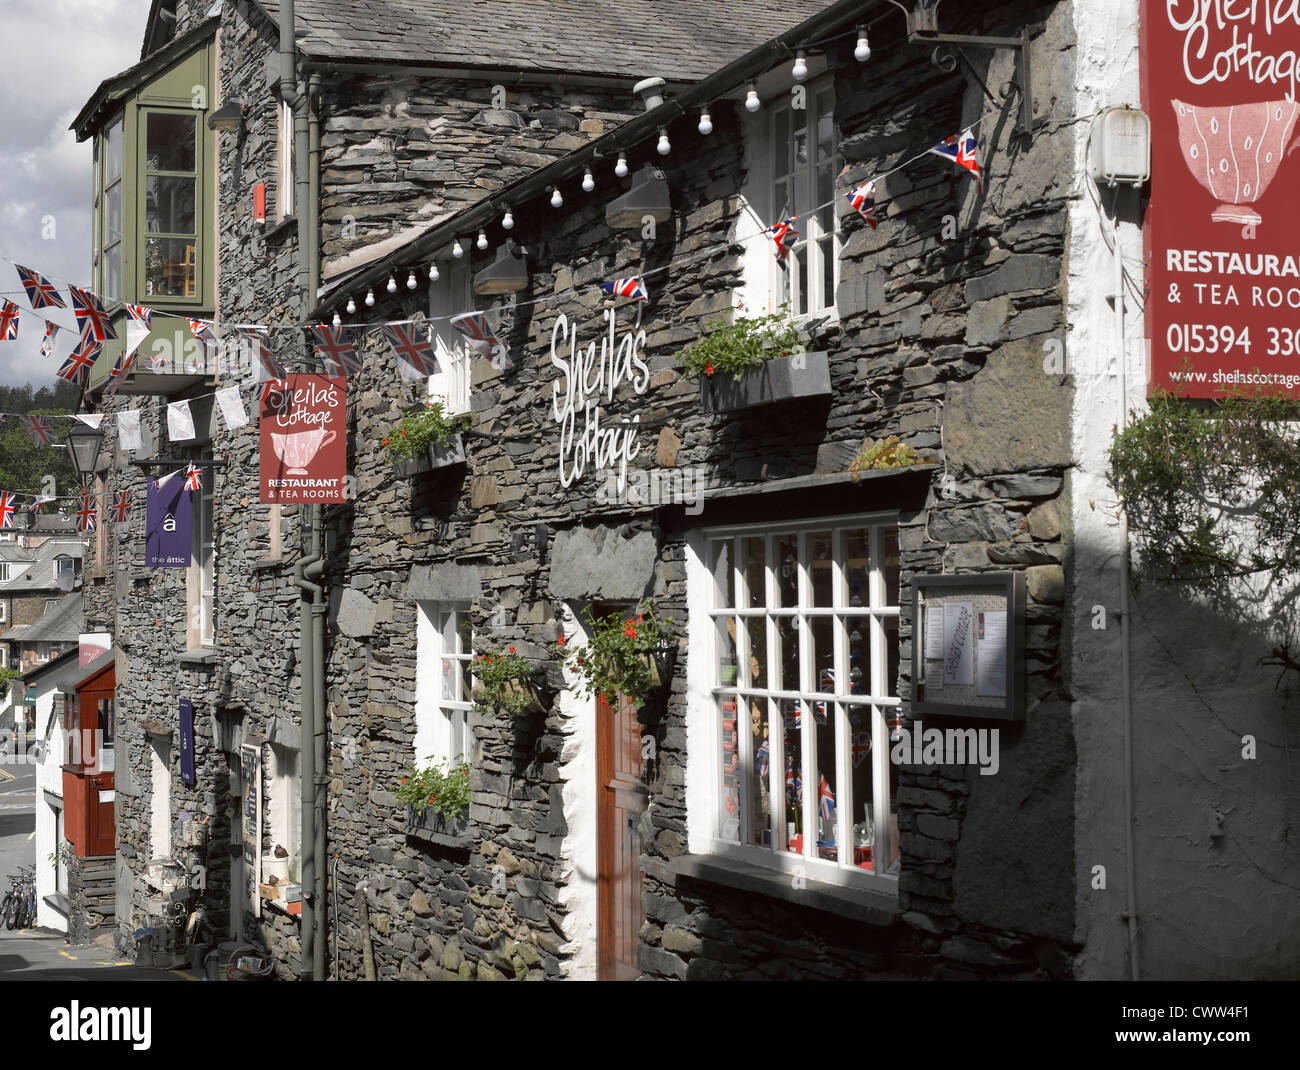 Restaurant and tea rooms cafe in the town centre in summer Ambleside Cumbria England UK United Kingdom GB Great Britain Stock Photo